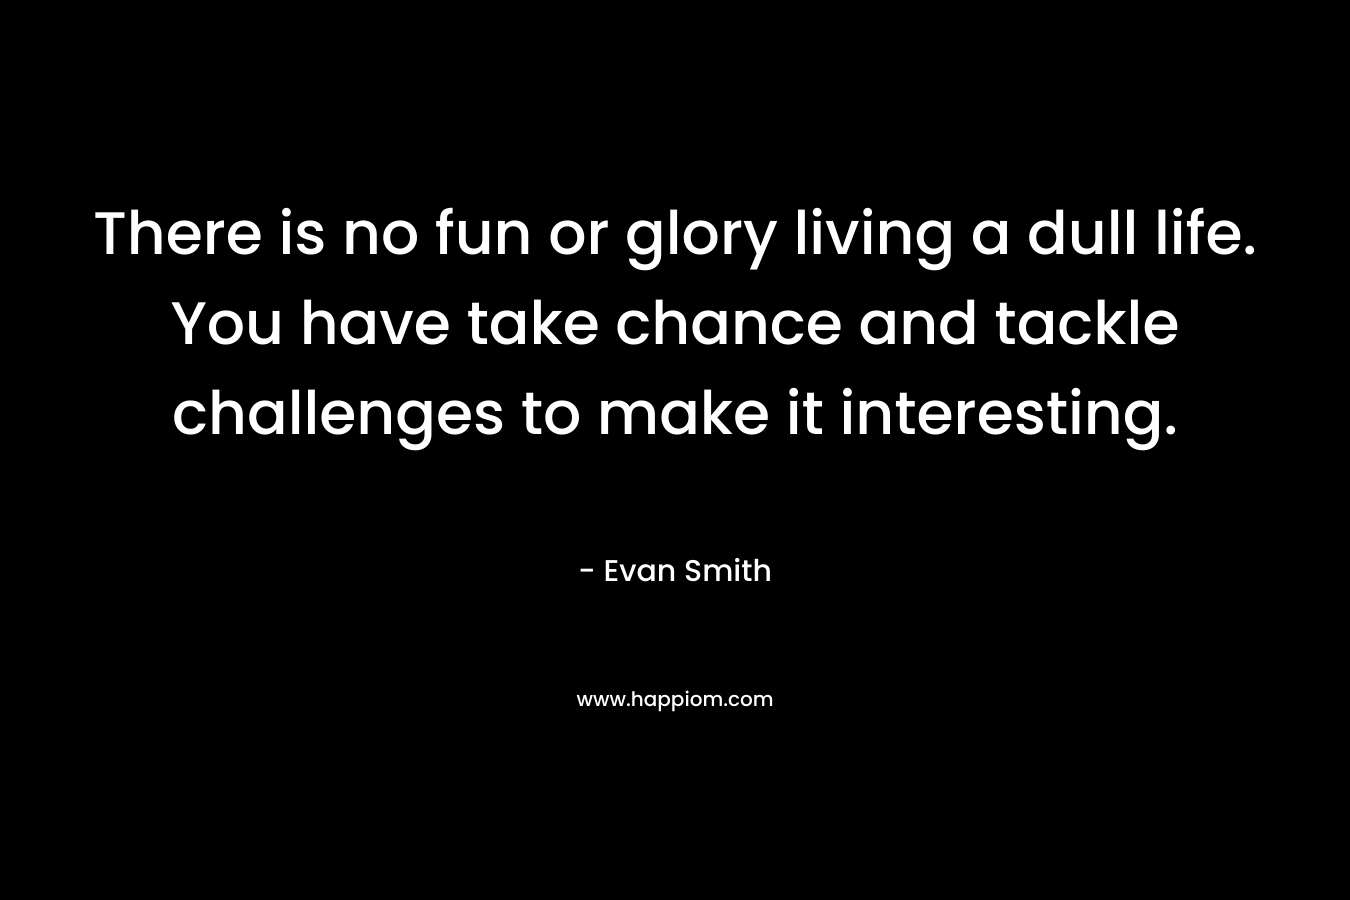 There is no fun or glory living a dull life. You have take chance and tackle challenges to make it interesting.